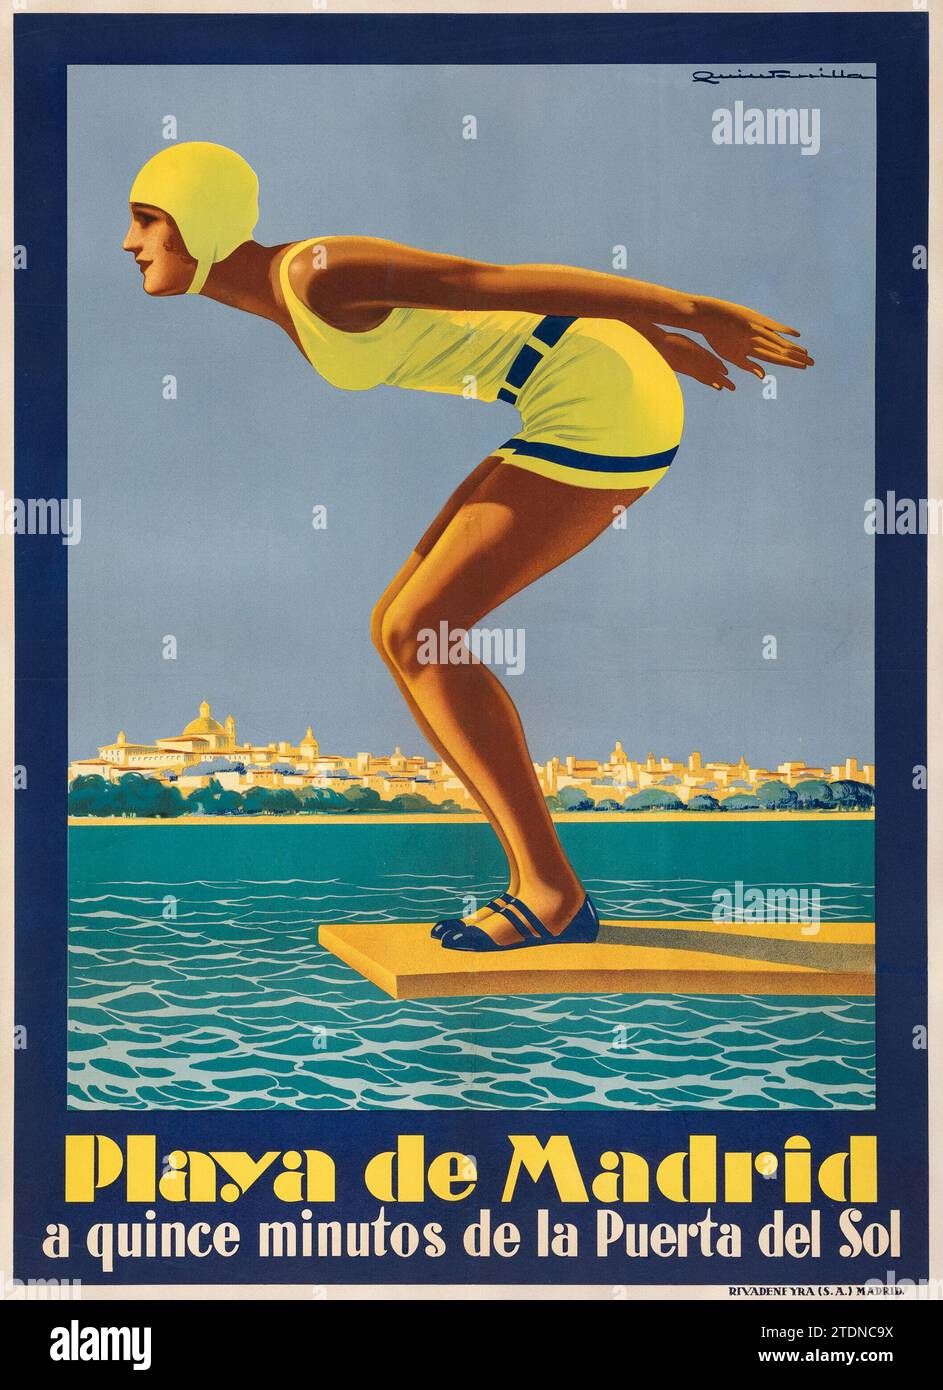 Playa de Madrid, Puerta del Sol - Travel poster for Madrid, 1932 - Women on trampoline about to dive in the ocean. Stock Photo